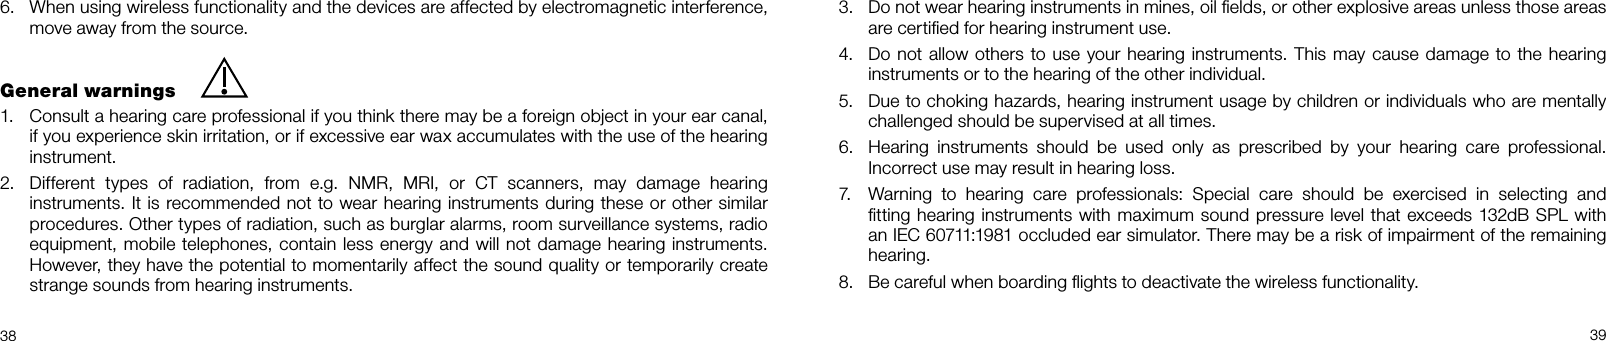  3839When using wireless functionality and the devices are affected by electromagnetic interference, 6.  move away from the source.General warningsConsult a hearing care professional if you think there may be a foreign object in your ear canal, 1.  if you experience skin irritation, or if excessive ear wax accumulates with the use of the hearing instrument. Different  types  of  radiation,  from  e.g.  NMR,  MRI,  or  CT  scanners,  may  damage  hearing 2.  instruments. It is recommended not to wear hearing instruments during these or other similar procedures. Other types of radiation, such as burglar alarms, room surveillance systems, radio equipment, mobile telephones, contain less energy and will not damage hearing instruments. However, they have the potential to momentarily affect the sound quality or temporarily create strange sounds from hearing instruments.Do not wear hearing instruments in mines, oil ﬁelds, or other explosive areas unless those areas 3.  are certiﬁed for hearing instrument use.Do not allow others to use your hearing instruments. This may cause damage to the hearing 4.  instruments or to the hearing of the other individual.Due to choking hazards, hearing instrument usage by children or individuals who are mentally 5.  challenged should be supervised at all times.Hearing  instruments  should  be  used  only  as  prescribed  by  your  hearing  care  professional. 6.  Incorrect use may result in hearing loss. Warning  to  hearing  care  professionals:  Special  care  should  be  exercised  in  selecting  and  7.  ﬁtting hearing instruments with maximum sound pressure level that exceeds 132dB SPL with an IEC 60711:1981 occluded ear simulator. There may be a risk of impairment of the remaining hearing. Be careful when boarding ﬂights to deactivate the wireless functionality.8. 